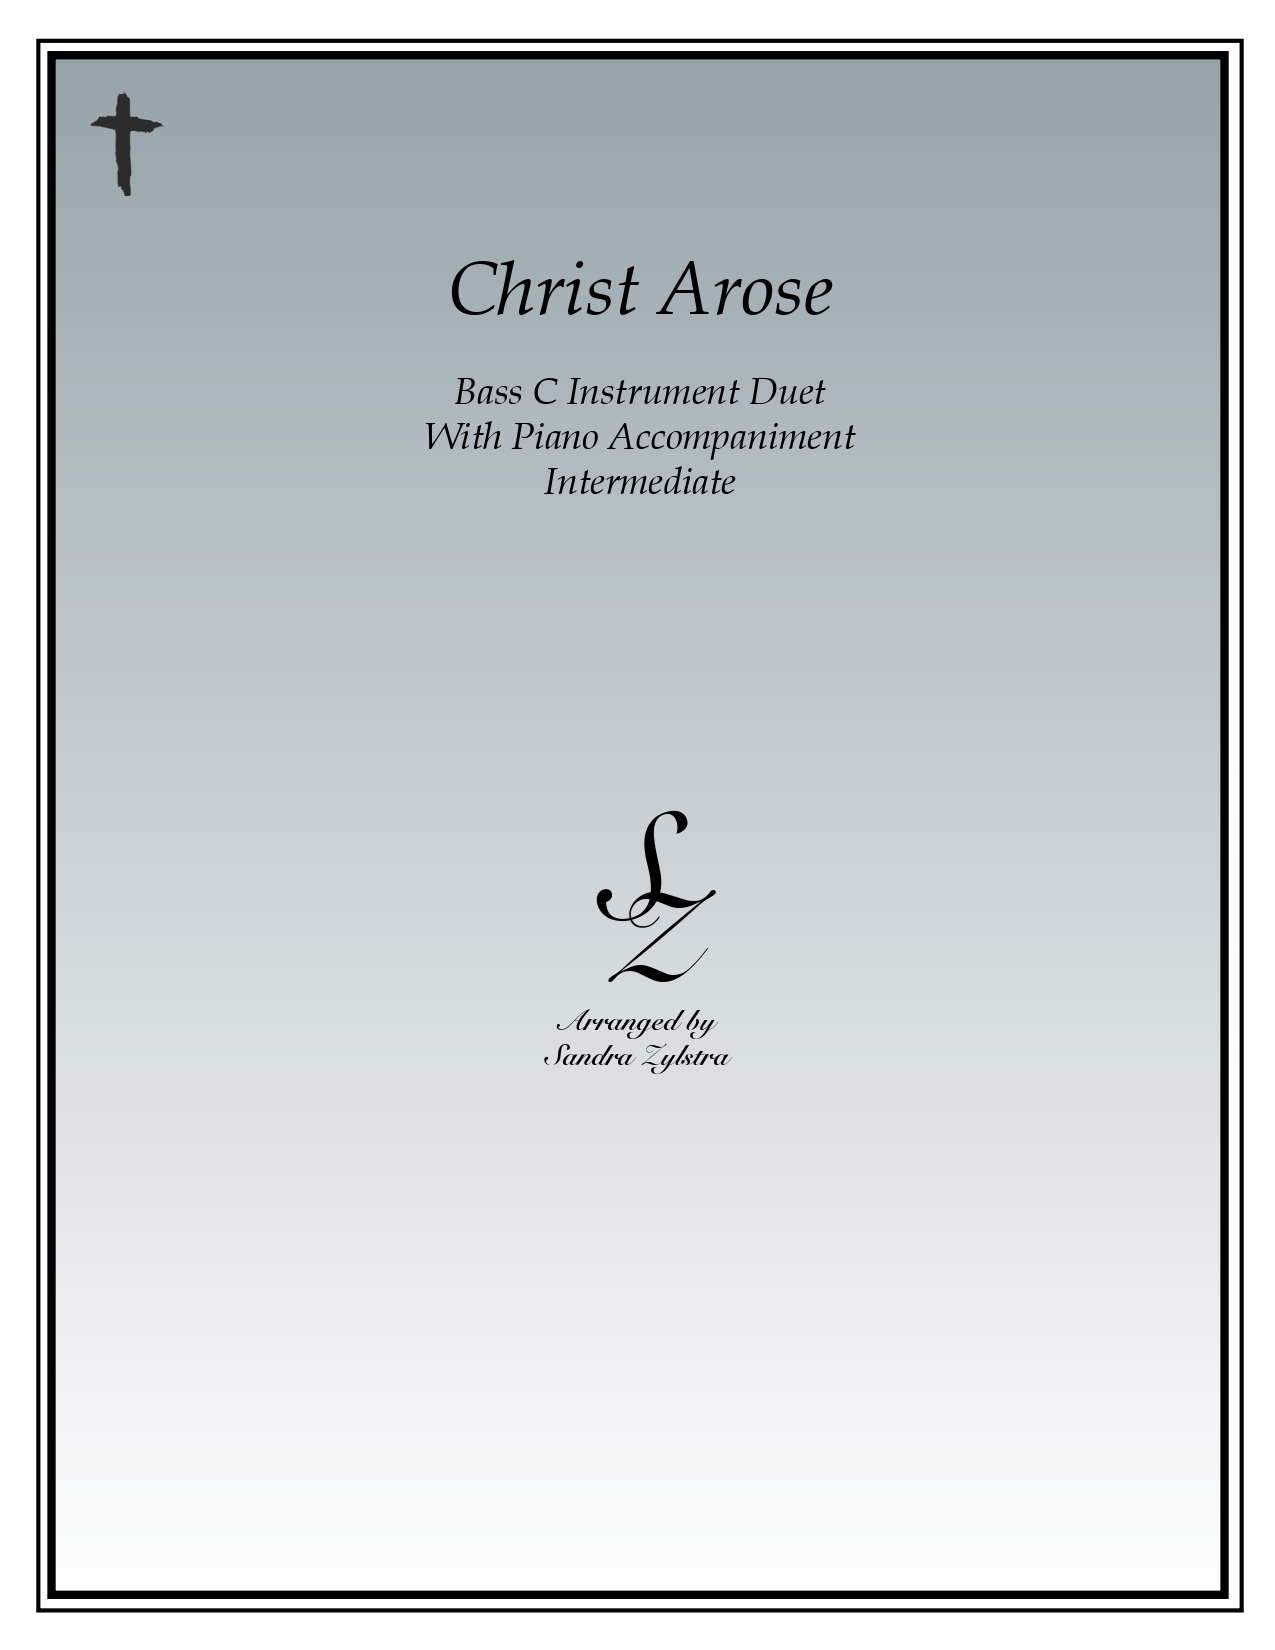 Christ Arose bass C instrument duet parts cover page 00011